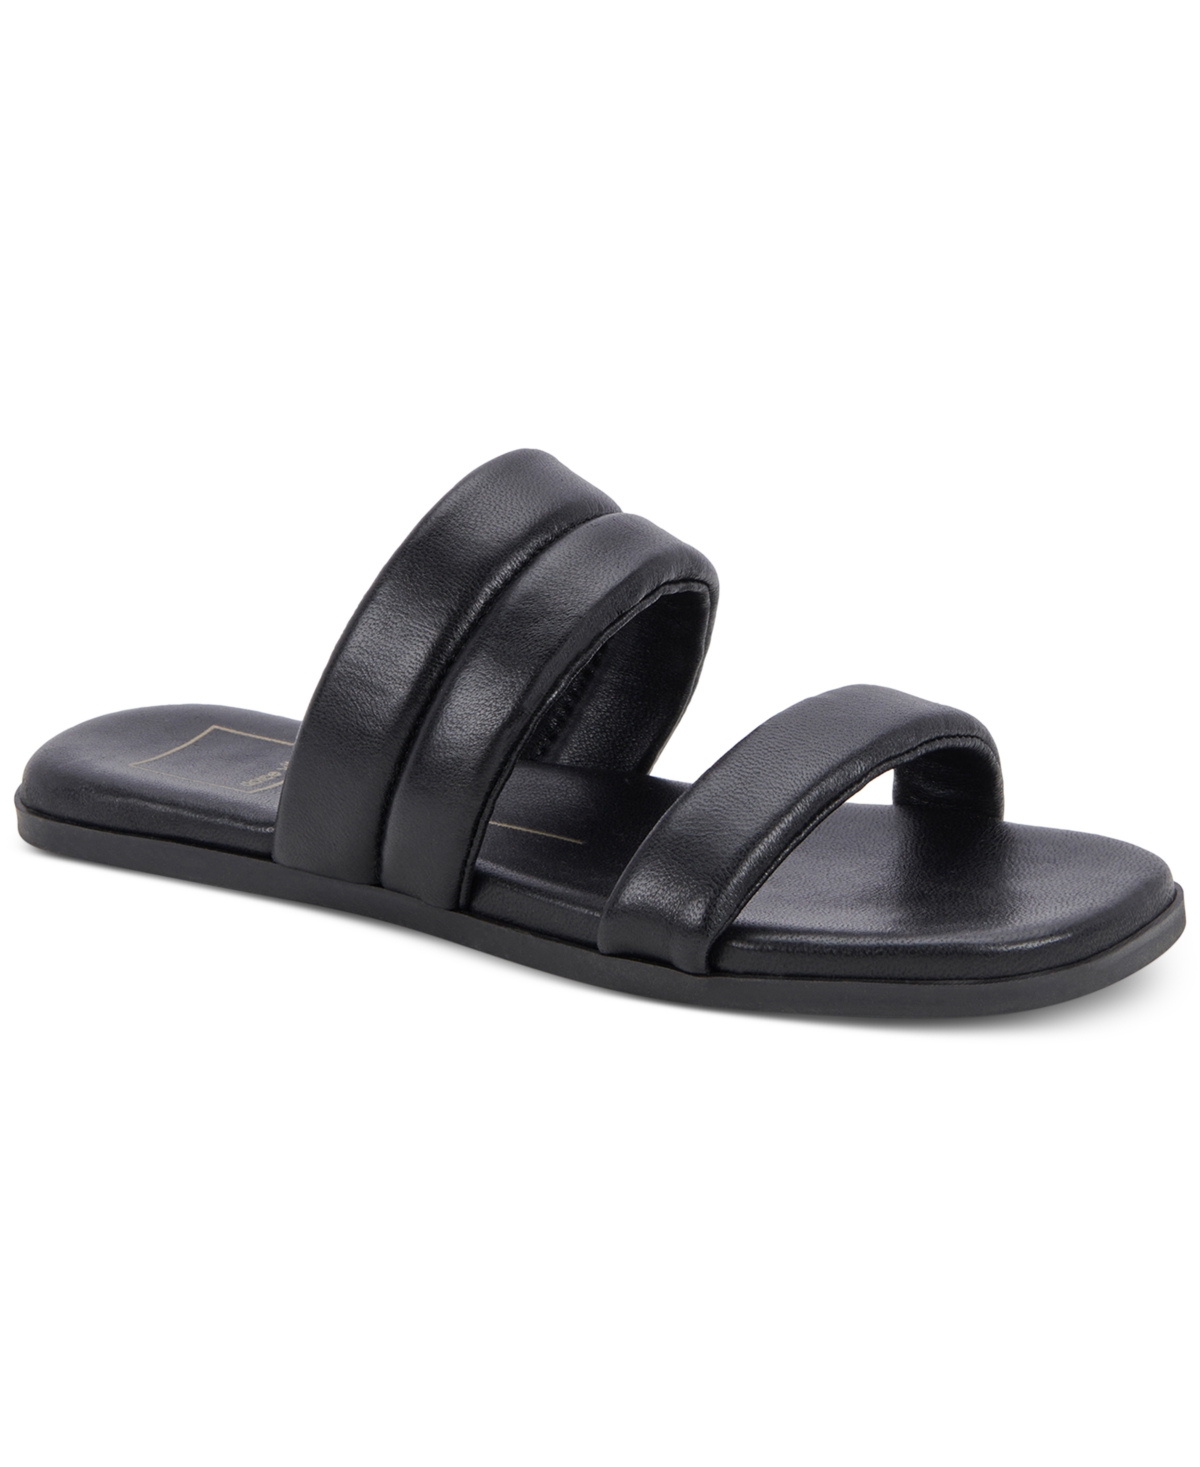 DOLCE VITA WOMEN'S ADORE PUFFY BAND SLIDE SANDALS WOMEN'S SHOES